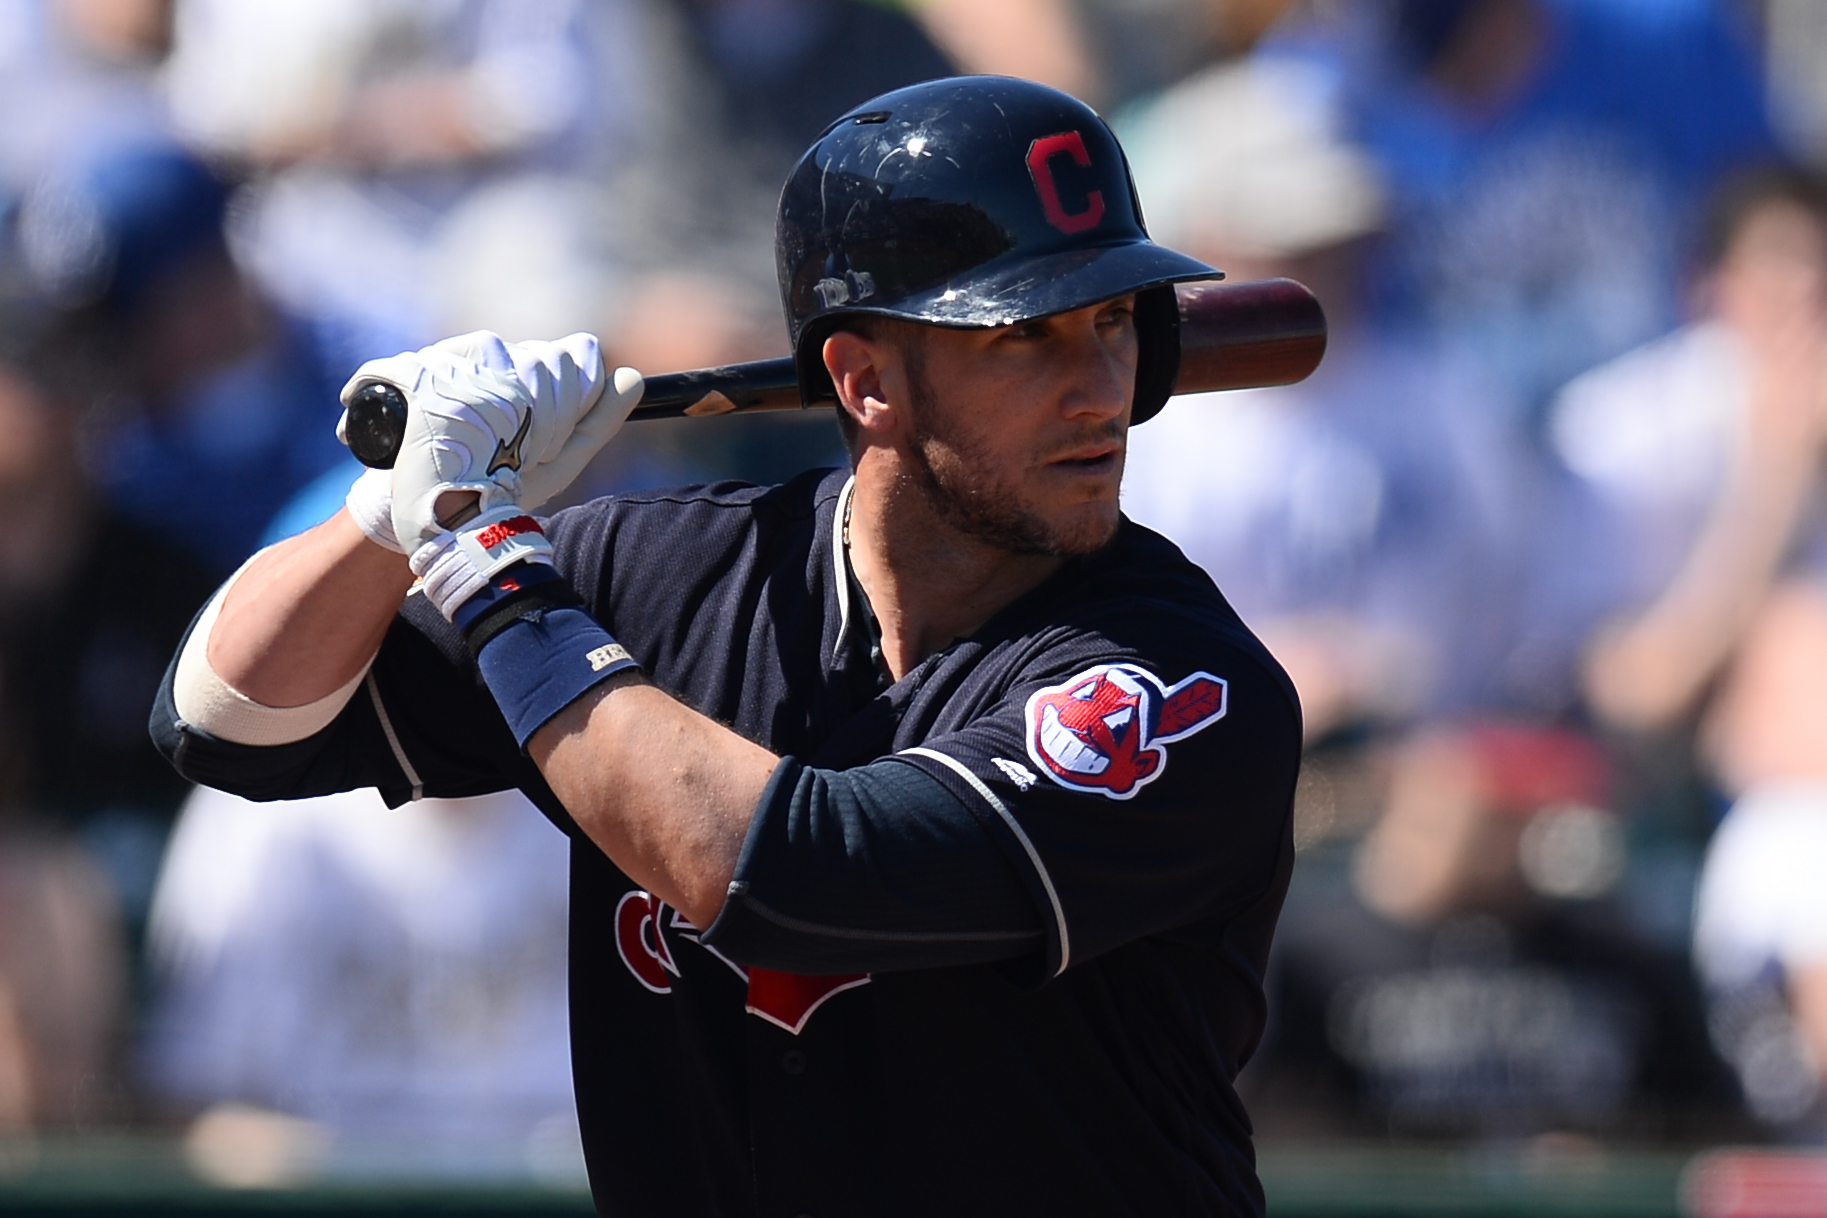 WATCH: Yan Gomes smacks his first homer of 2023